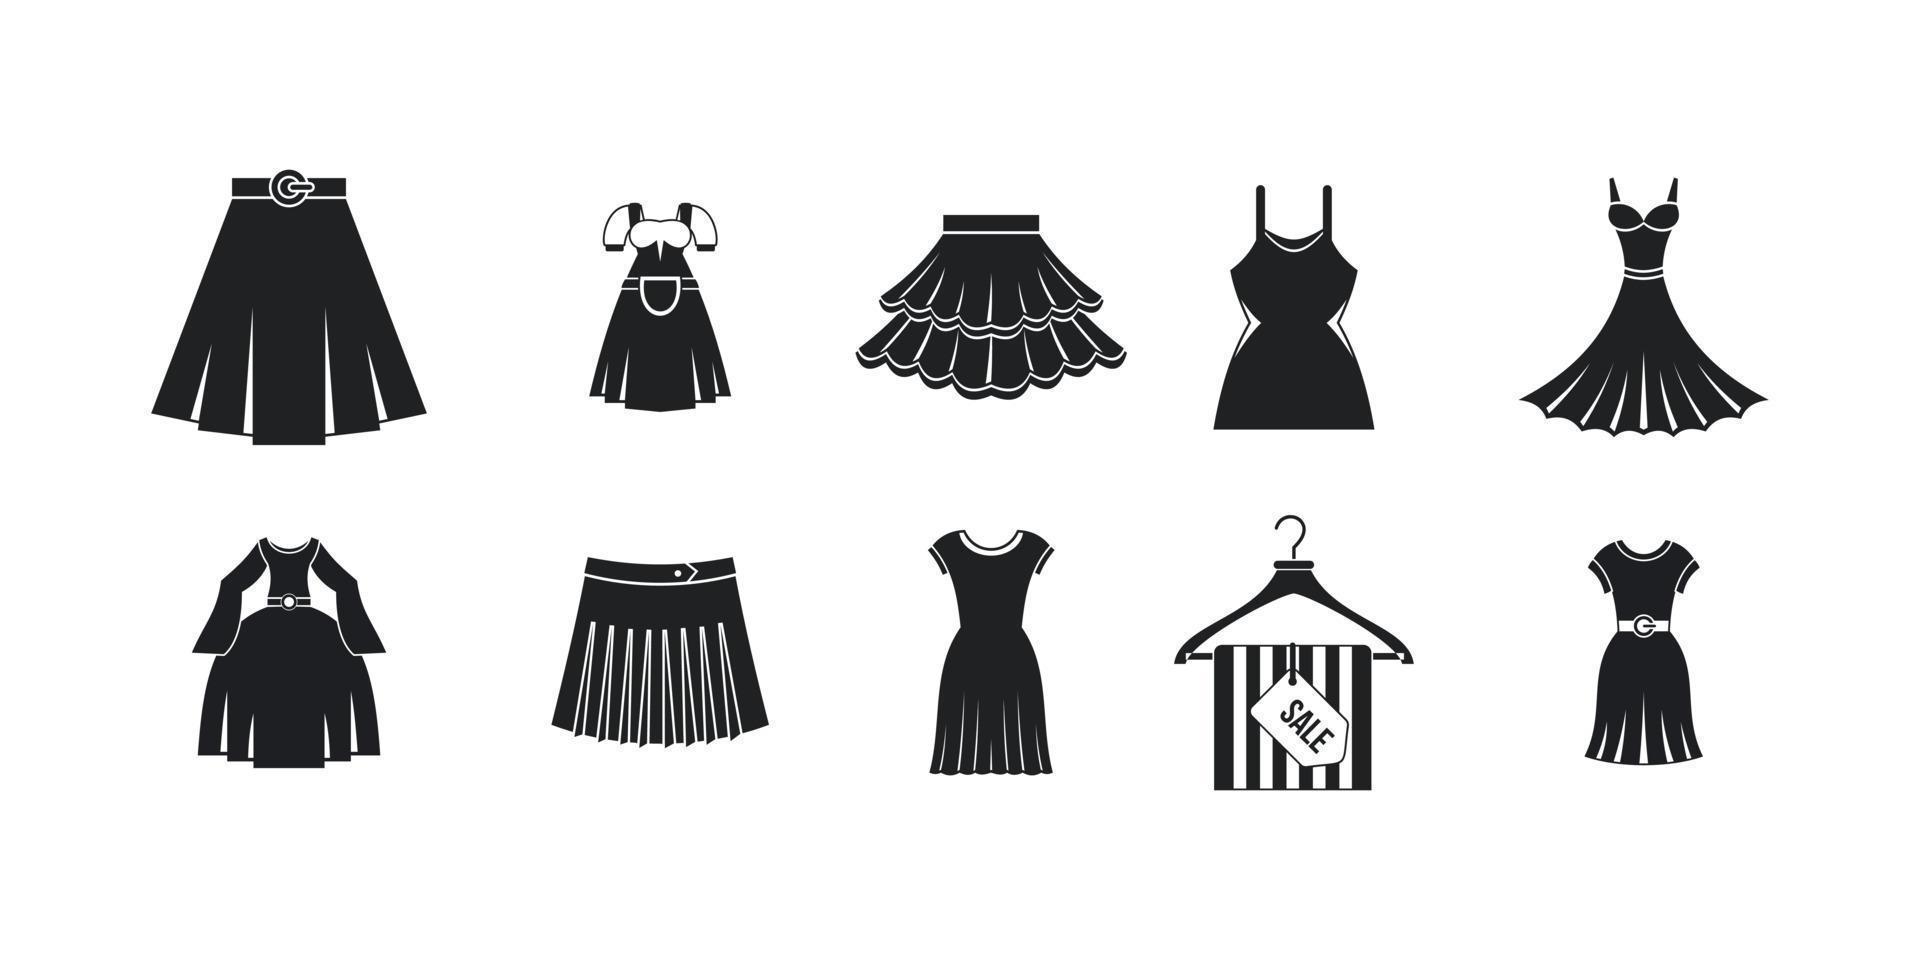 Dress skirt icon set, simple style vector